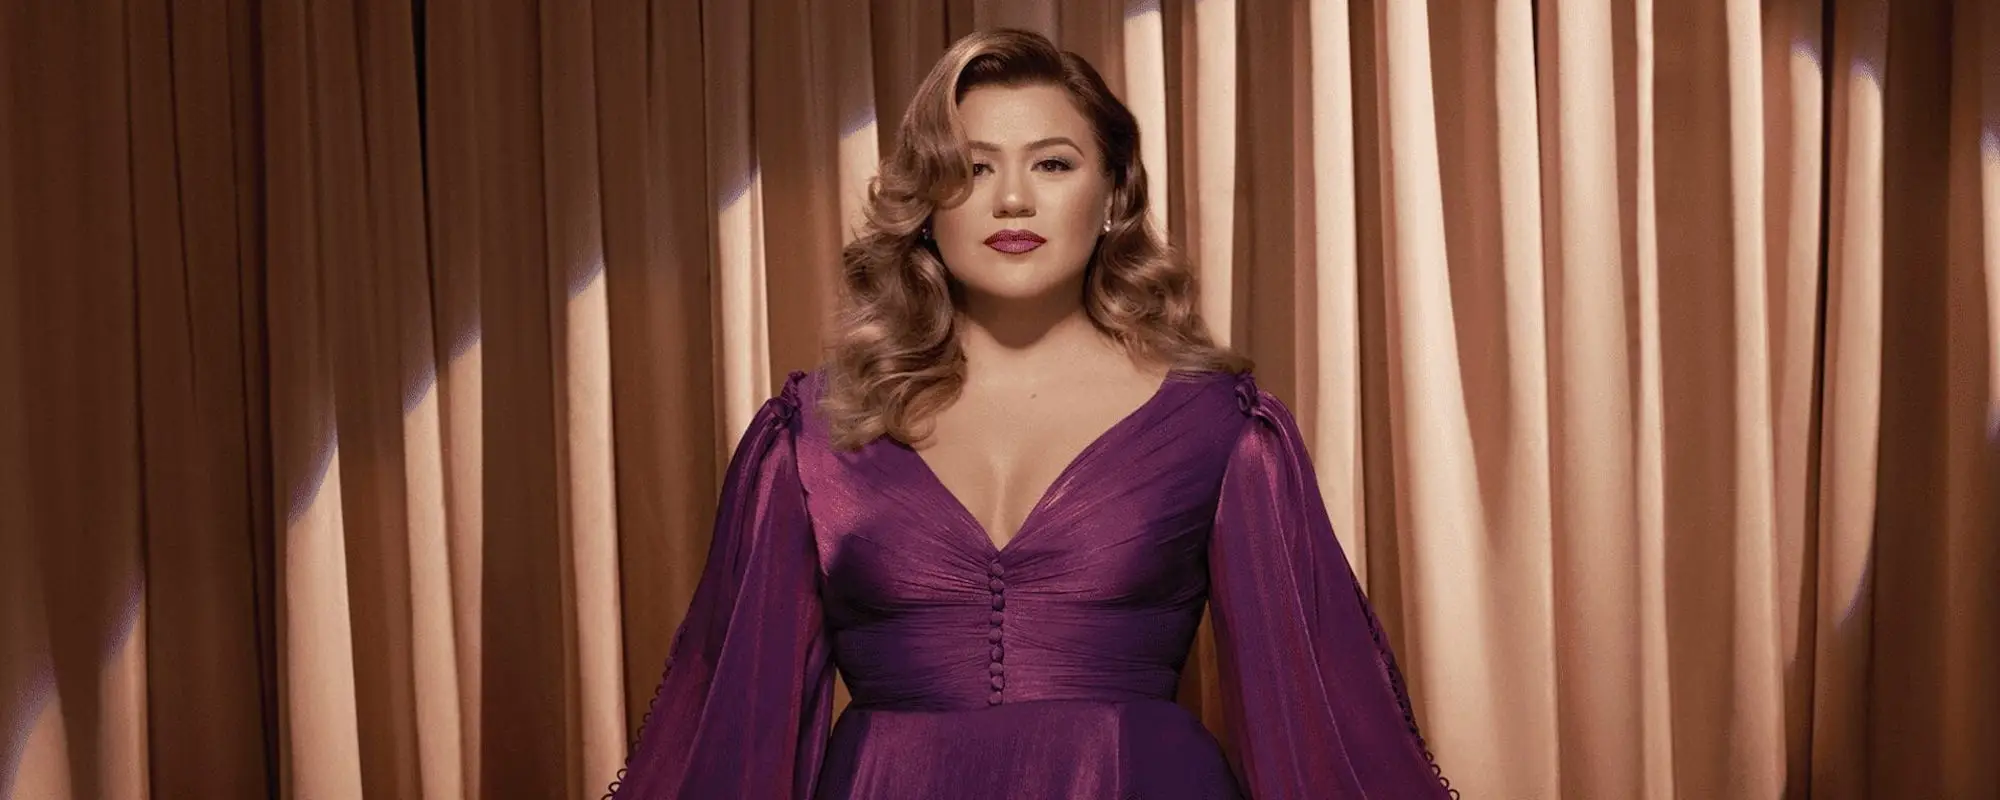 Watch The Latest From Kelly Clarkson’s “Kellyoke” as She Covers The Weeknd and Sarah McLachlan